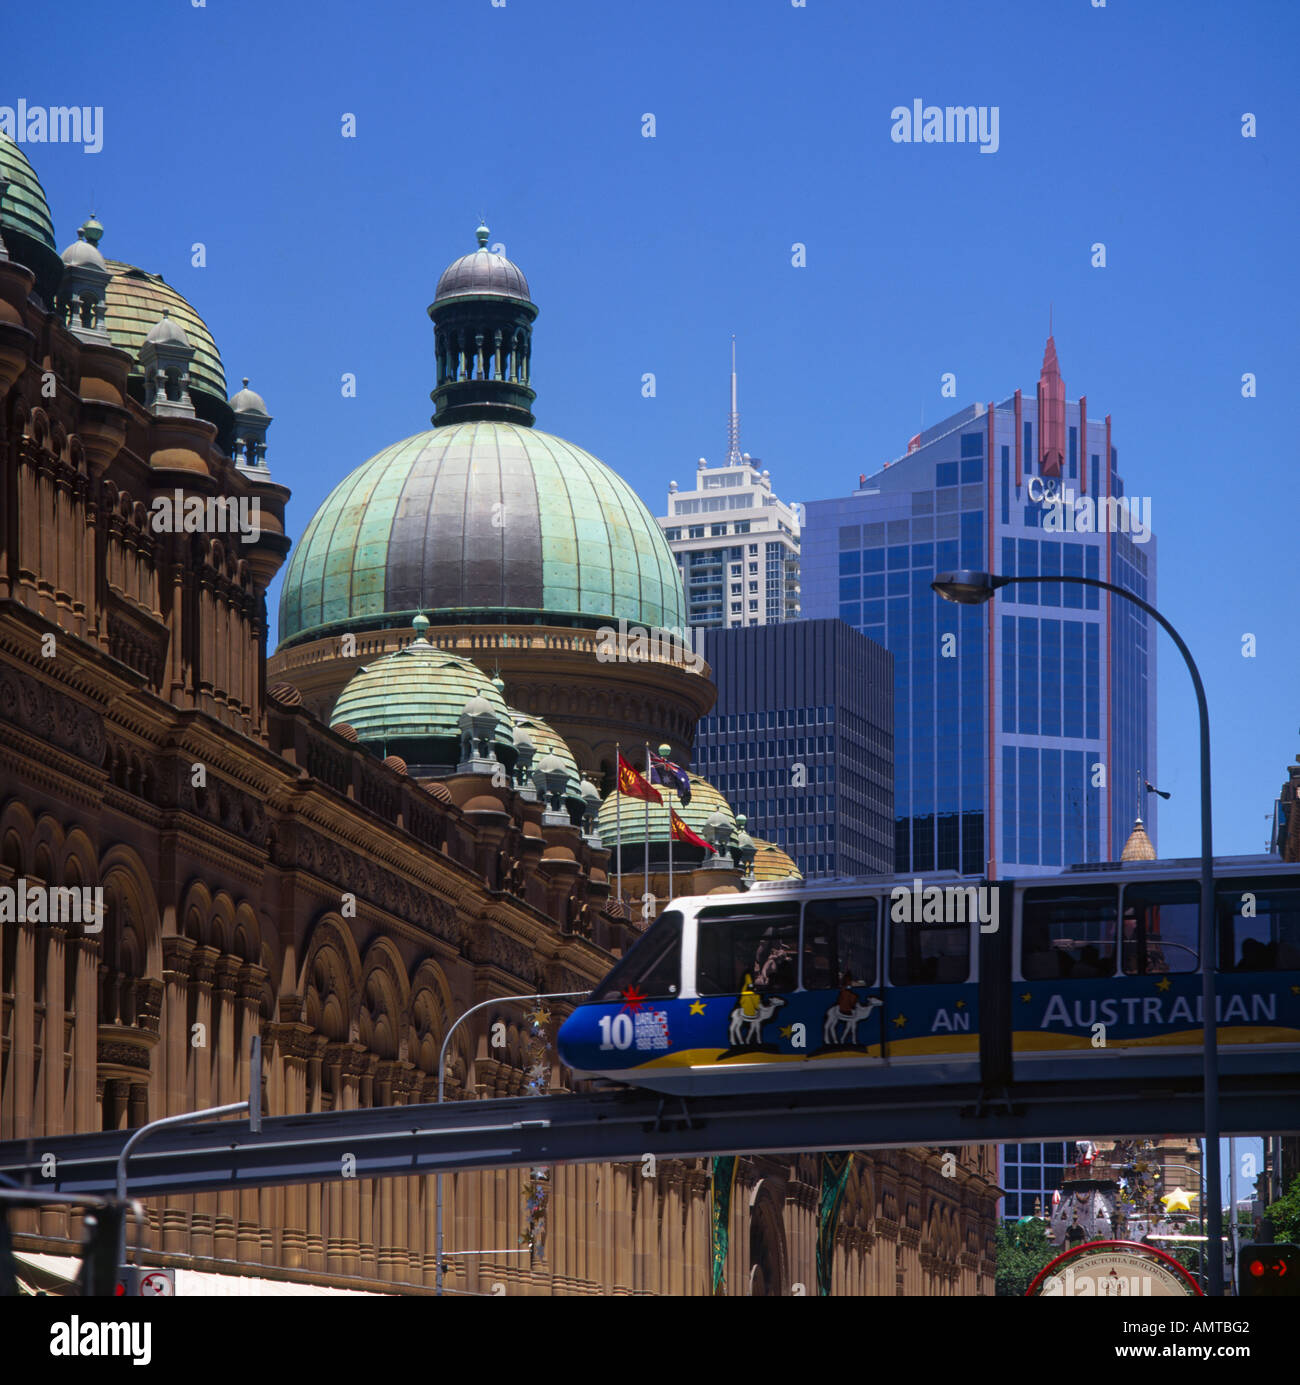 Upper level roof of beautiful elegant red stone with copper dome at Queen Victoria Building and Monorail Sydney Australia Stock Photo